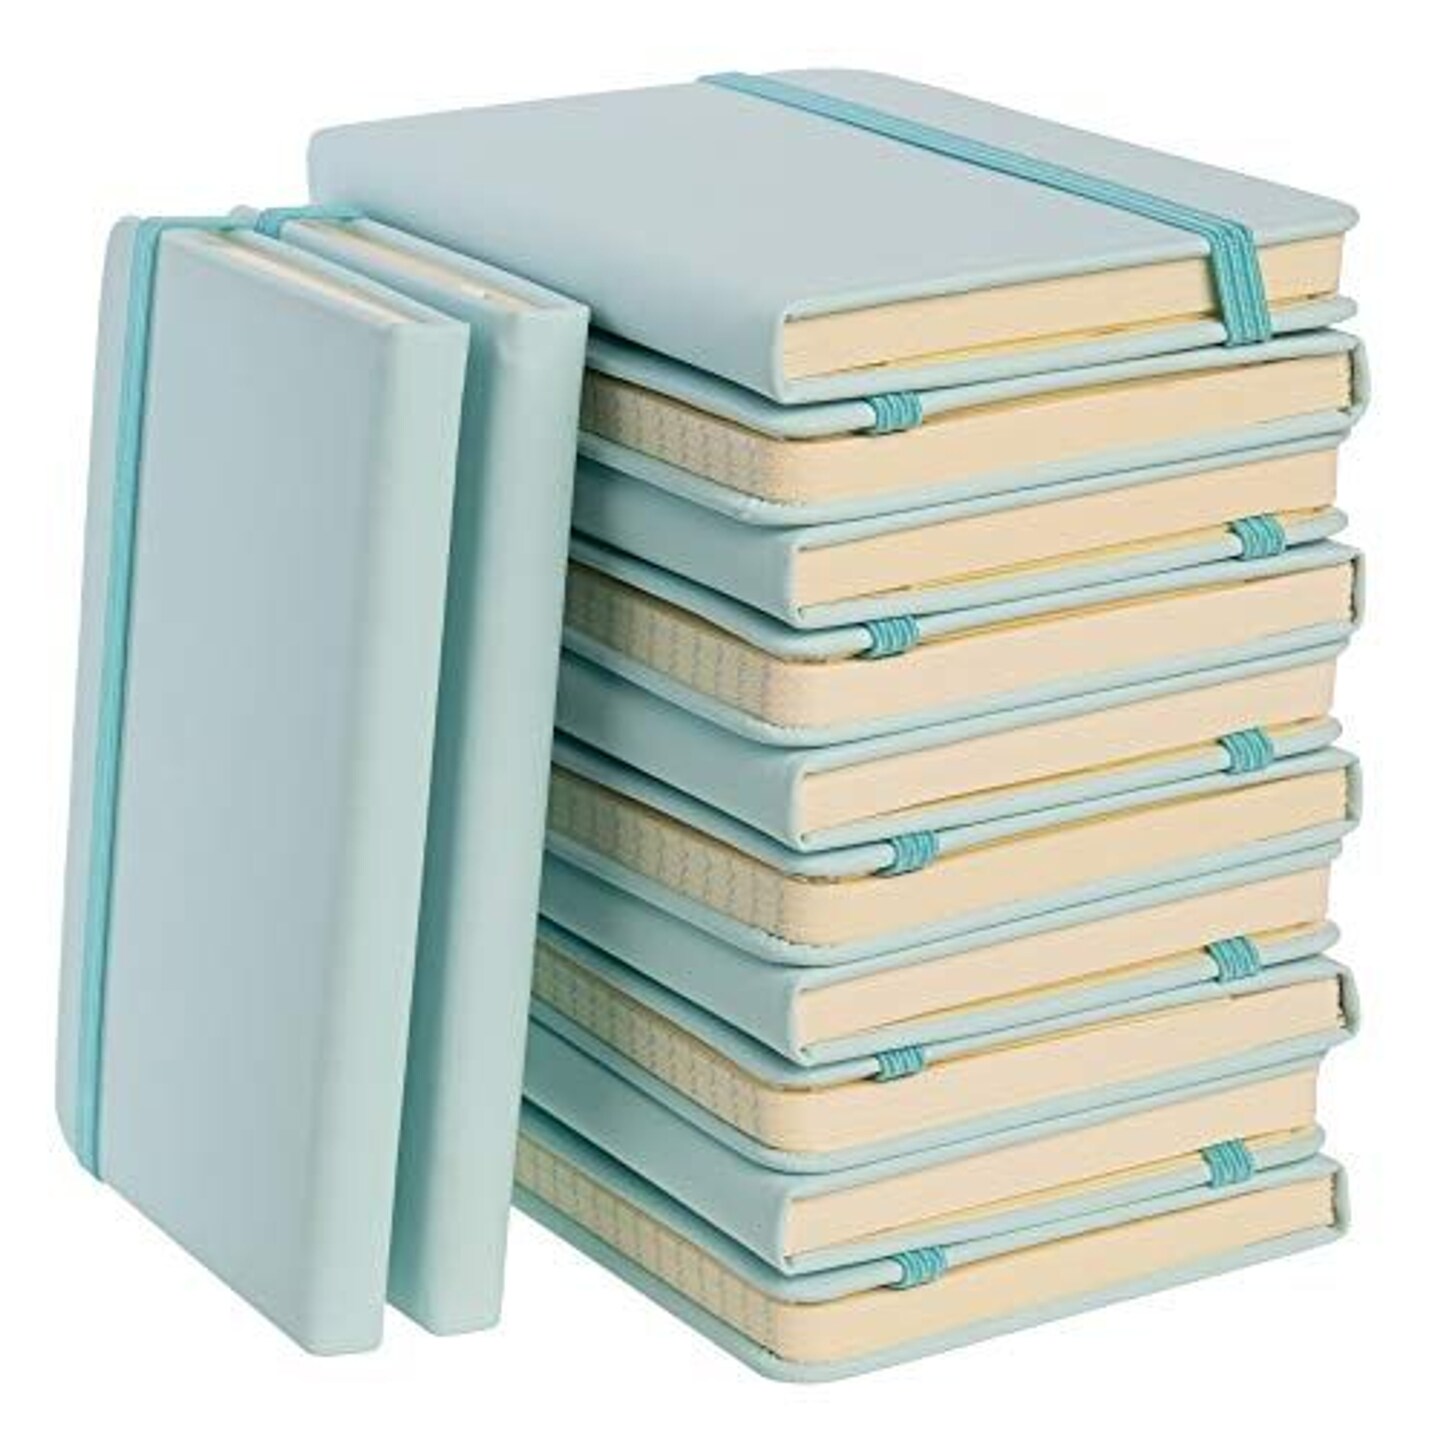 Simply Genius A6 Pocket Size Mini Notebooks with Hardcover - Ruled Small Pocket Journal Set for School, Home &#x26; Office - 124 pages (3.7&#x22; x 5.7&#x22;) with Inner Pocket (Light Blue, 12 Pack)